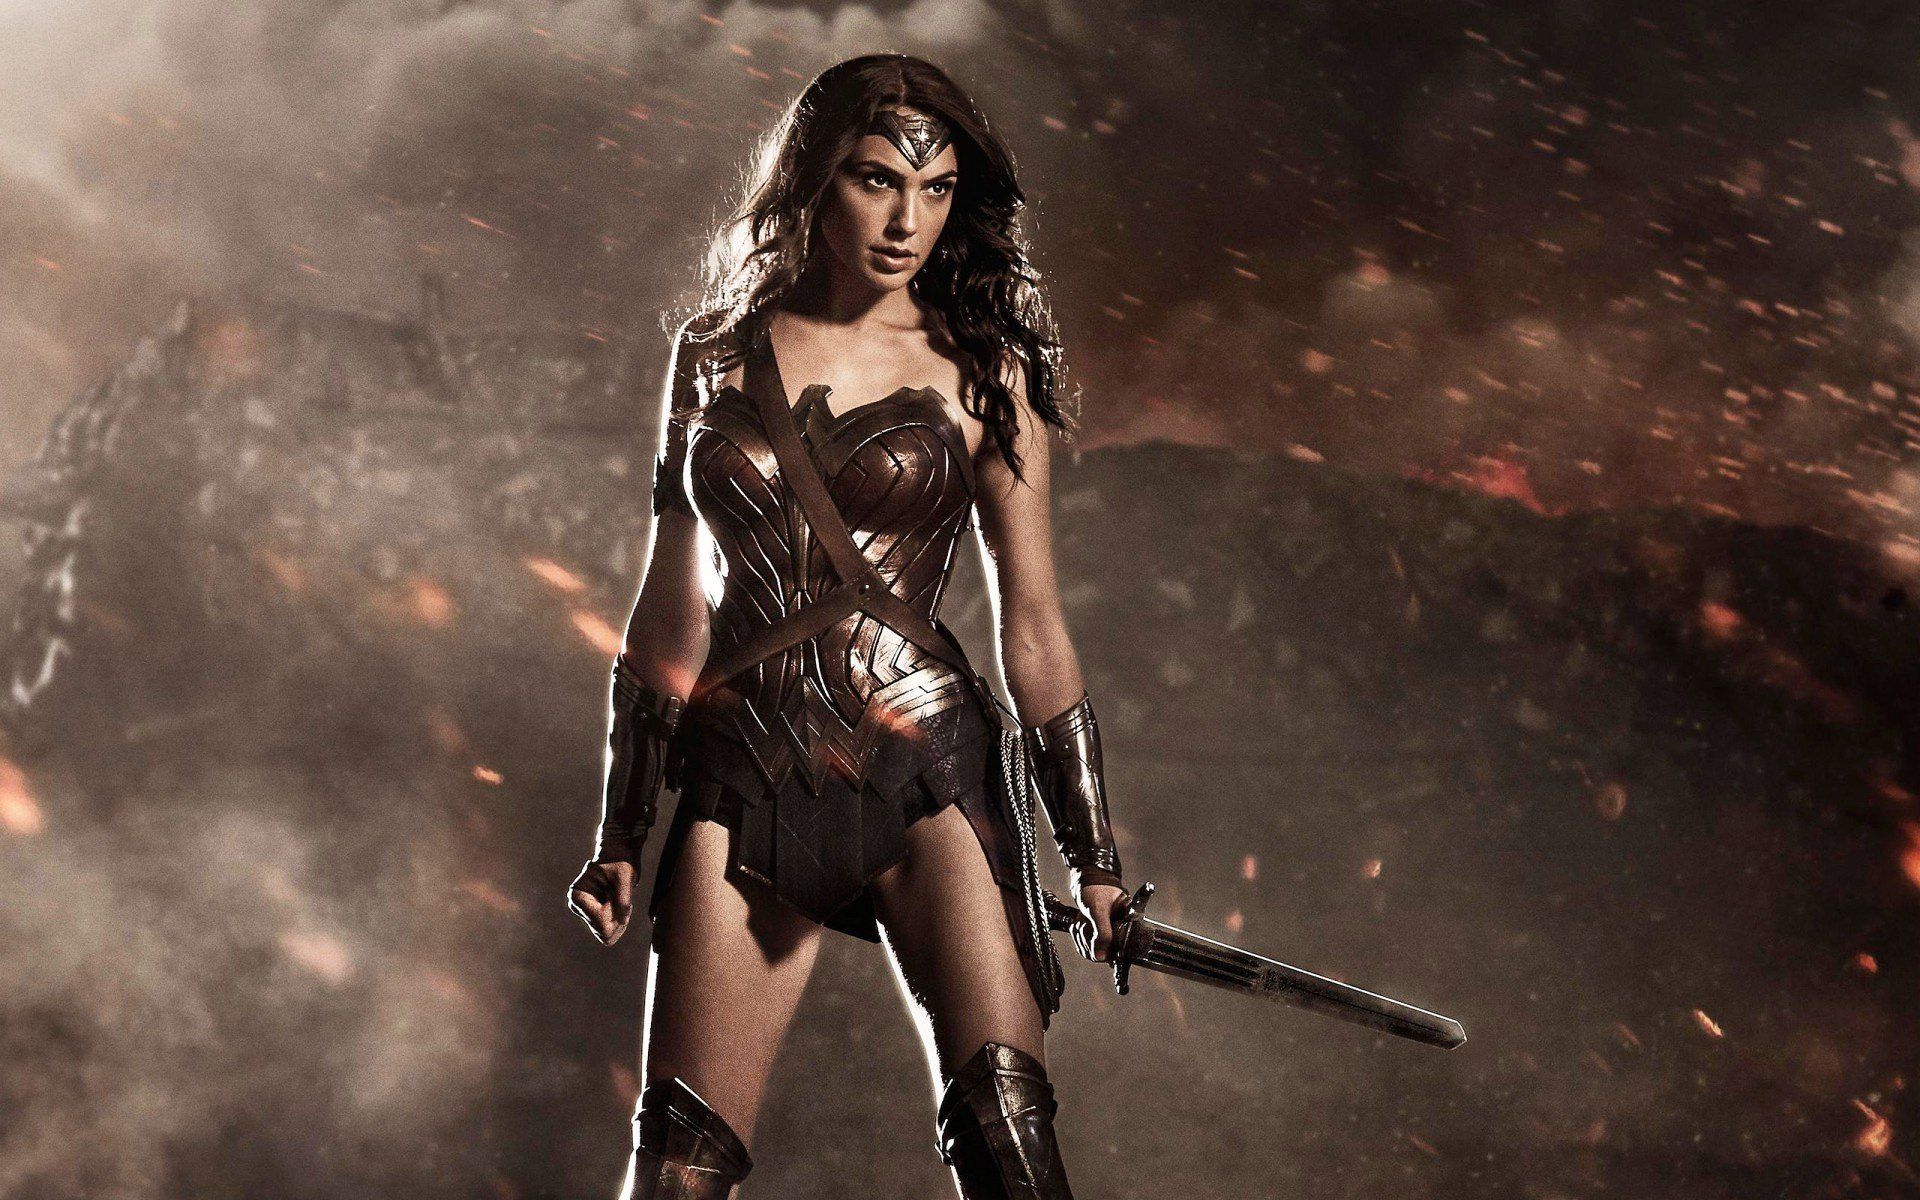 Gal Gadot as Wonder Woman in the 2017 motion picture